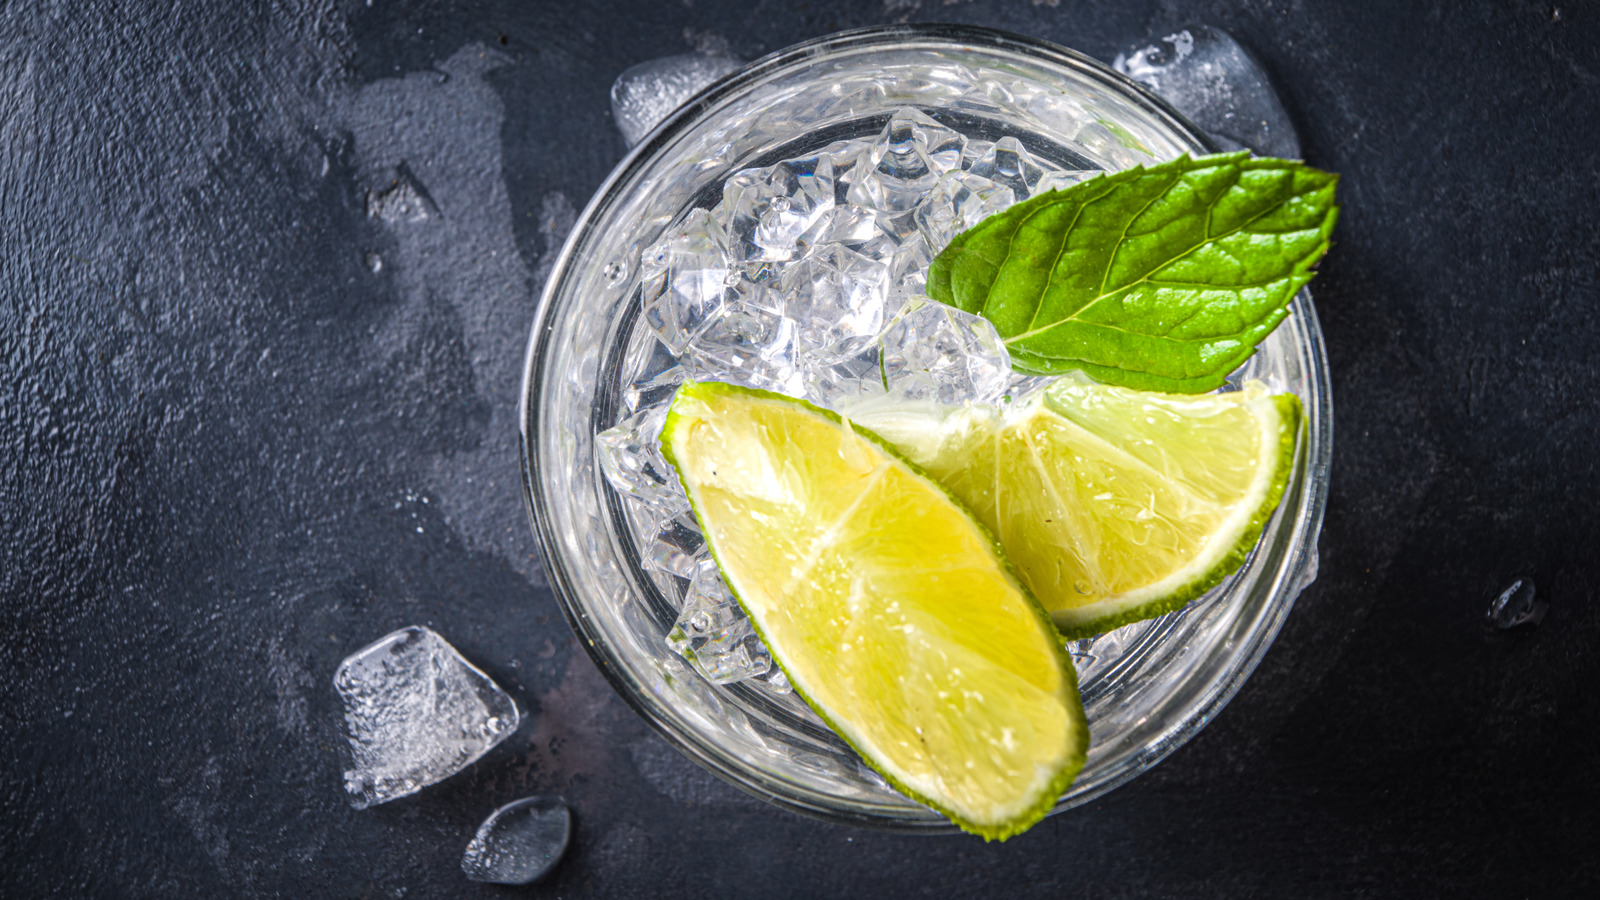 Why You Should Probably Avoid Lemons And Limes At Most Restaurants